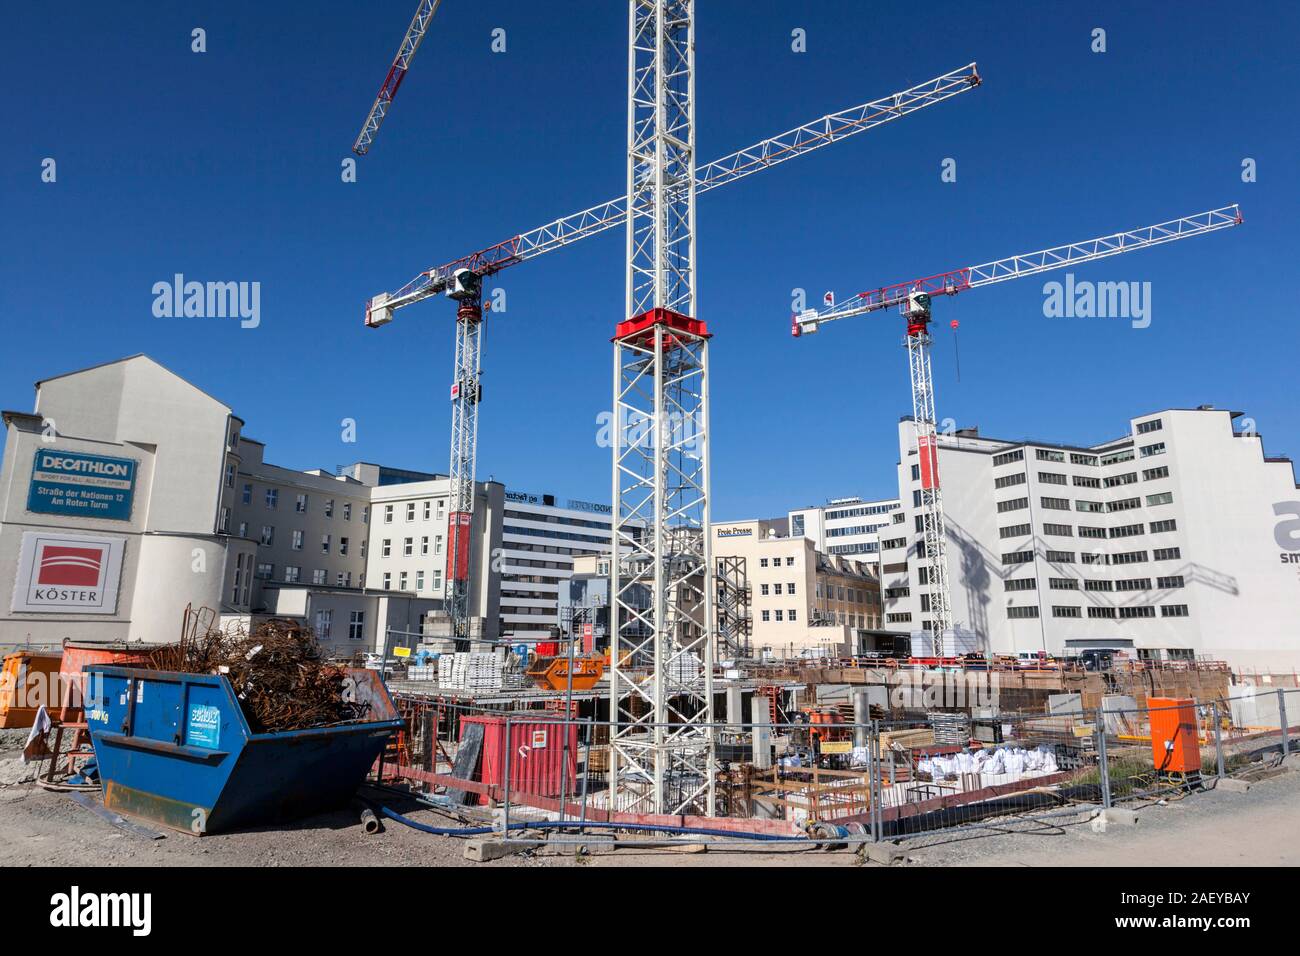 Large construction site in the city center of Chemnitz Stock Photo